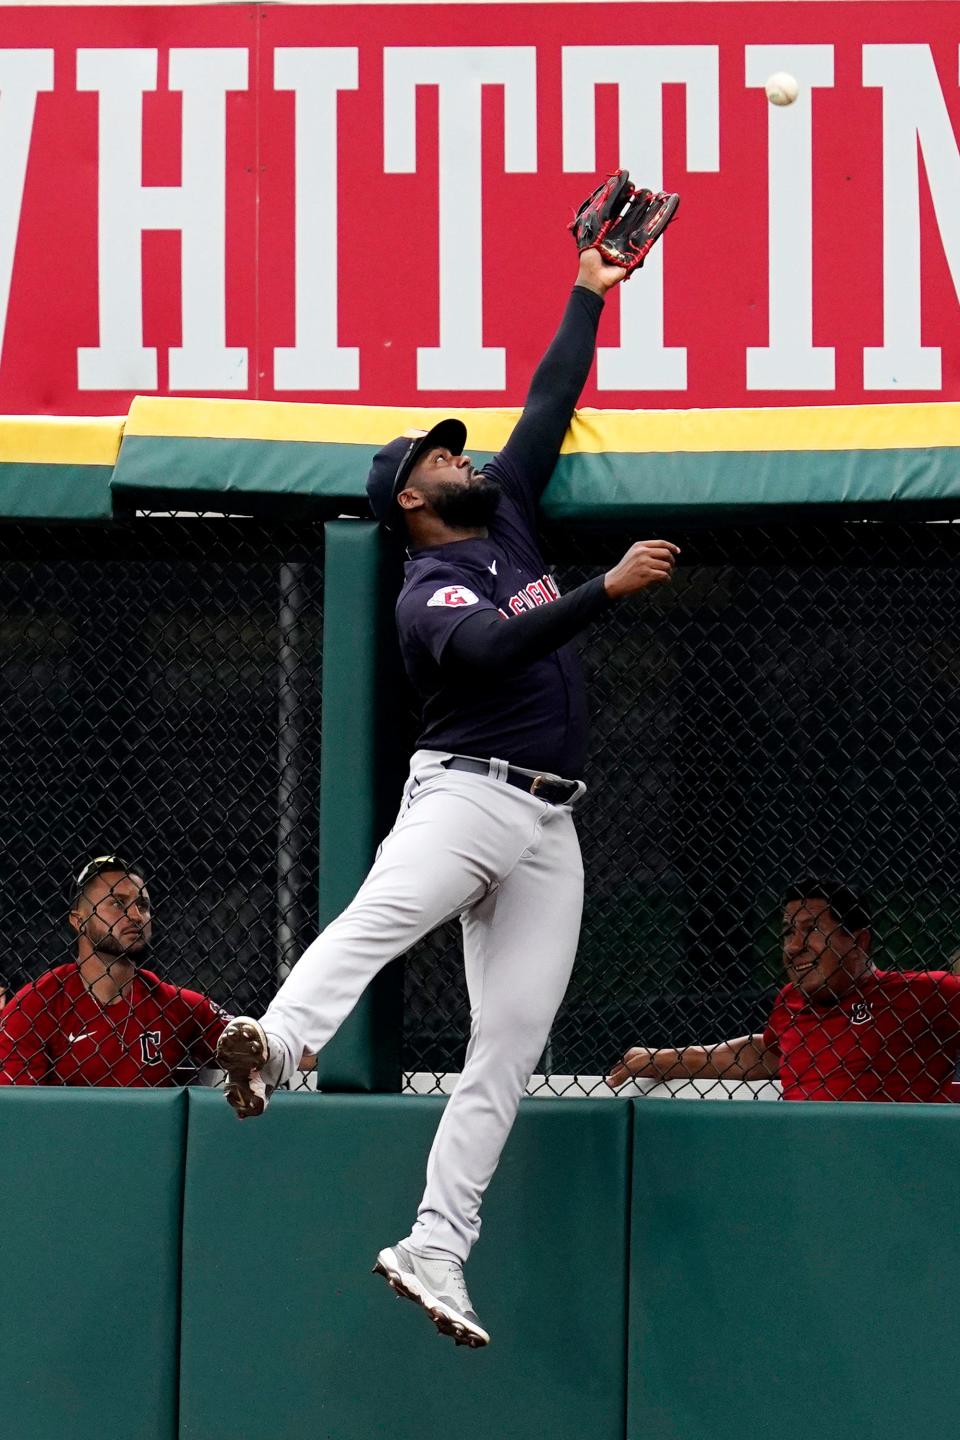 Cleveland Guardians right fielder Franmil Reyes cannot make the play on a two-run home run by Chicago White Sox's Leury Garcia during the second inning of a baseball game in Chicago, Sunday, July 24, 2022. (AP Photo/Nam Y. Huh)